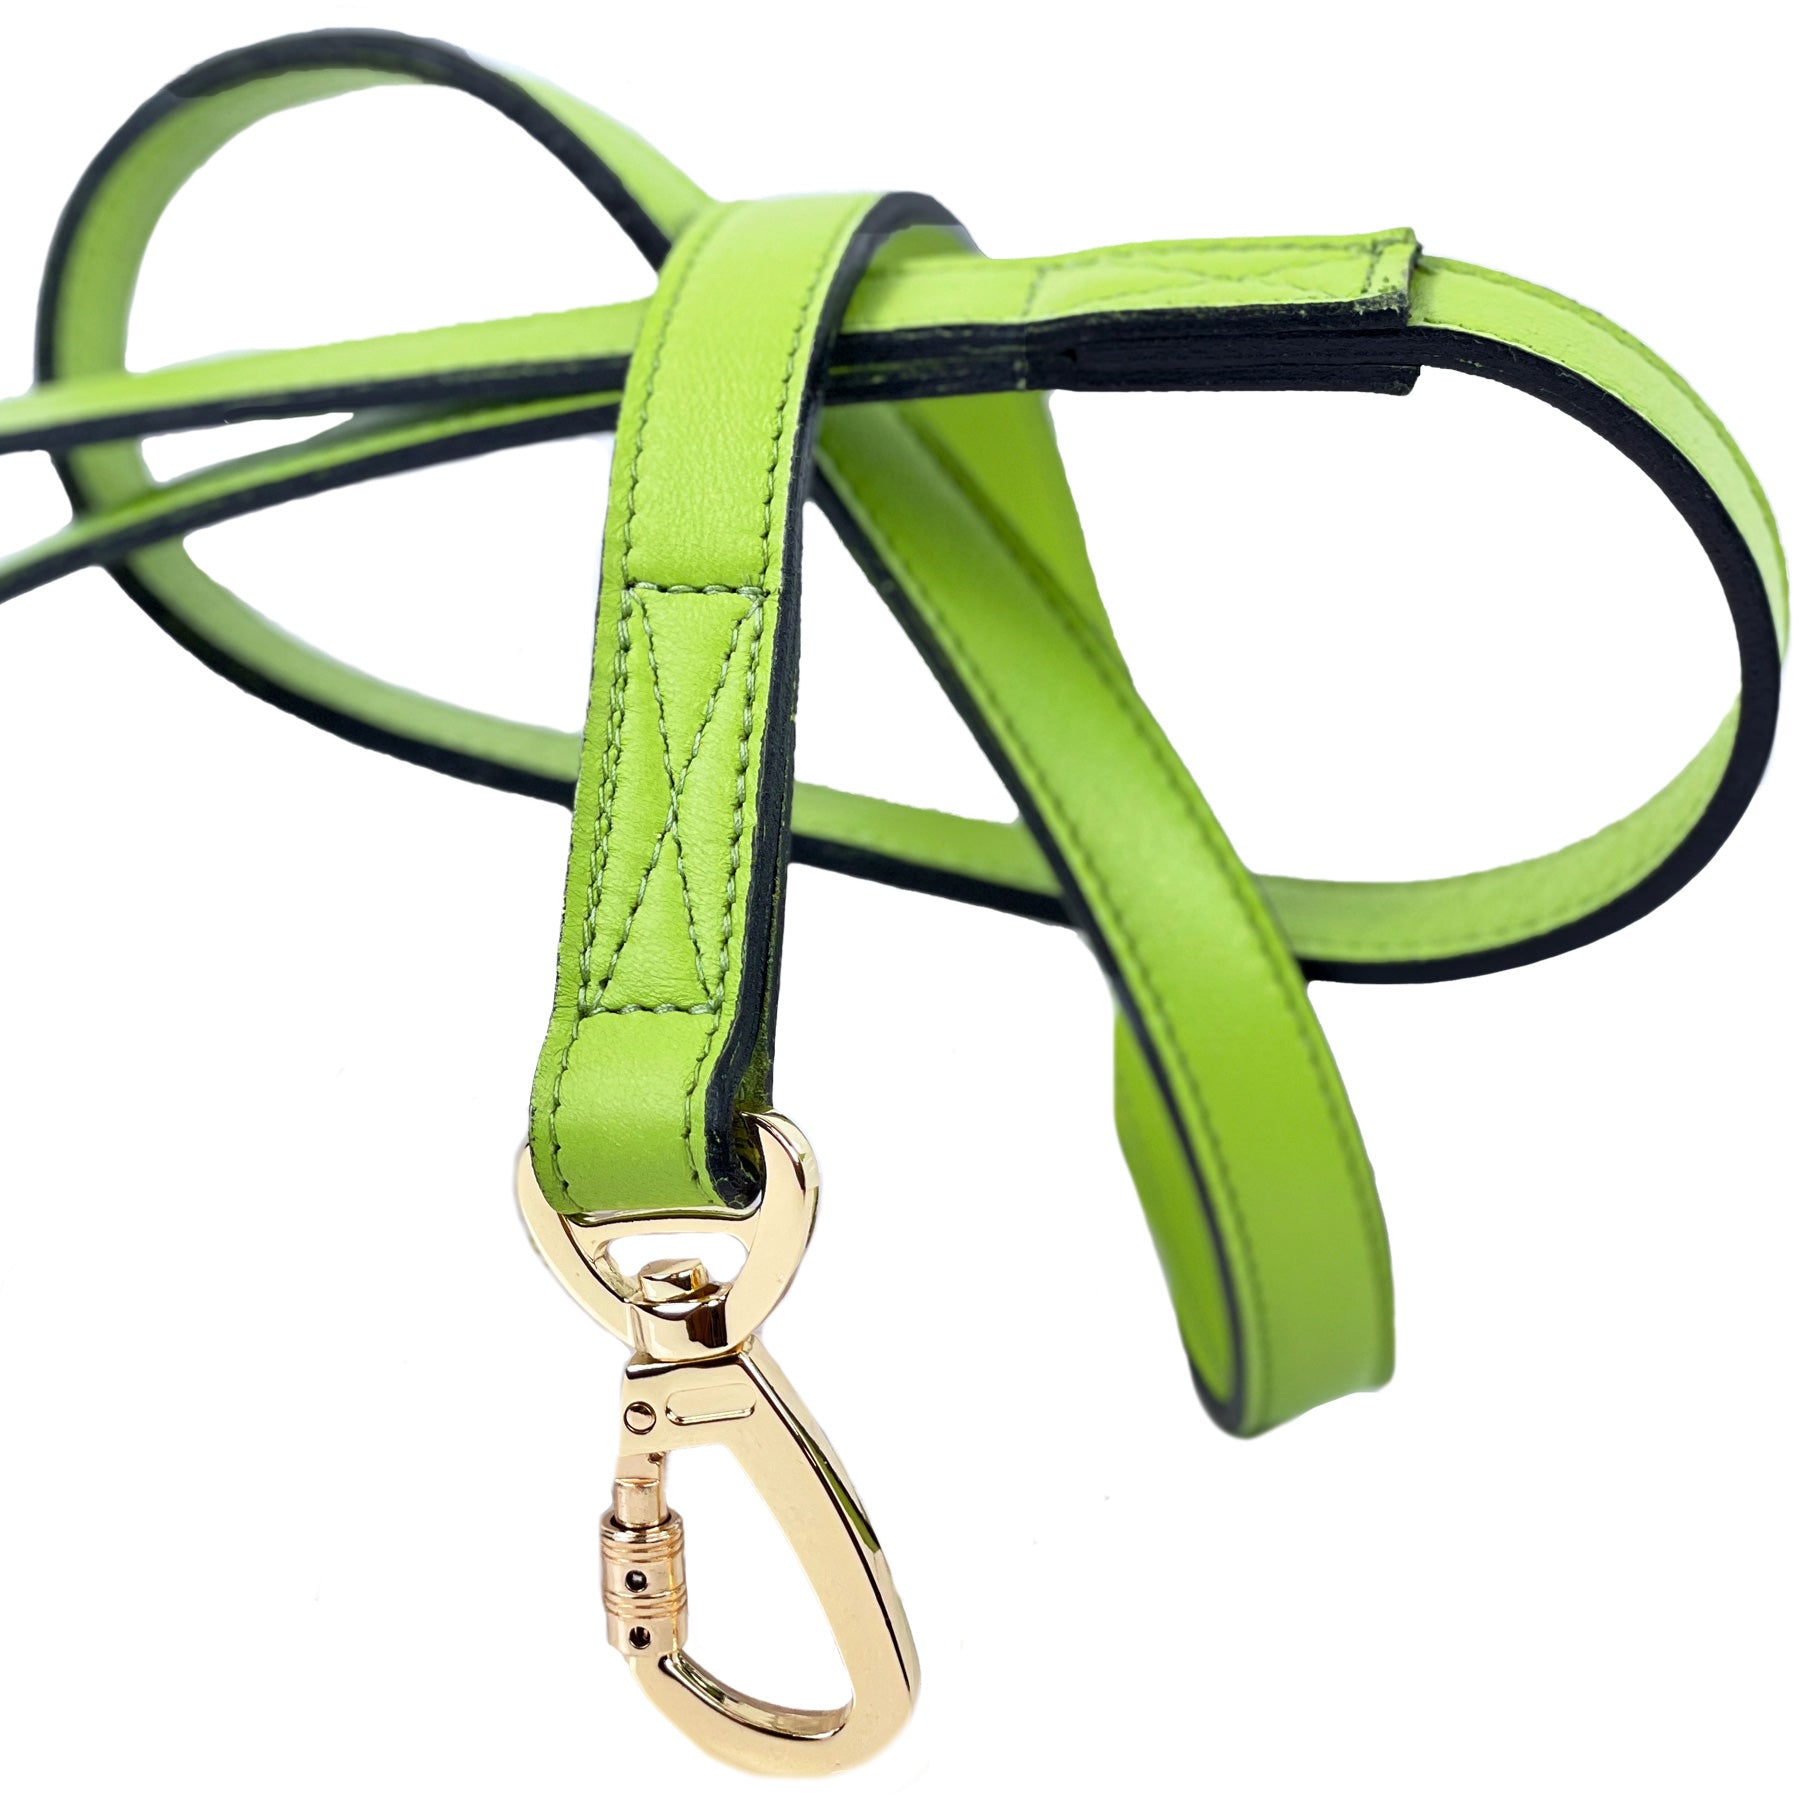 Leap Frog Dog Leash in Lime Green & Gold